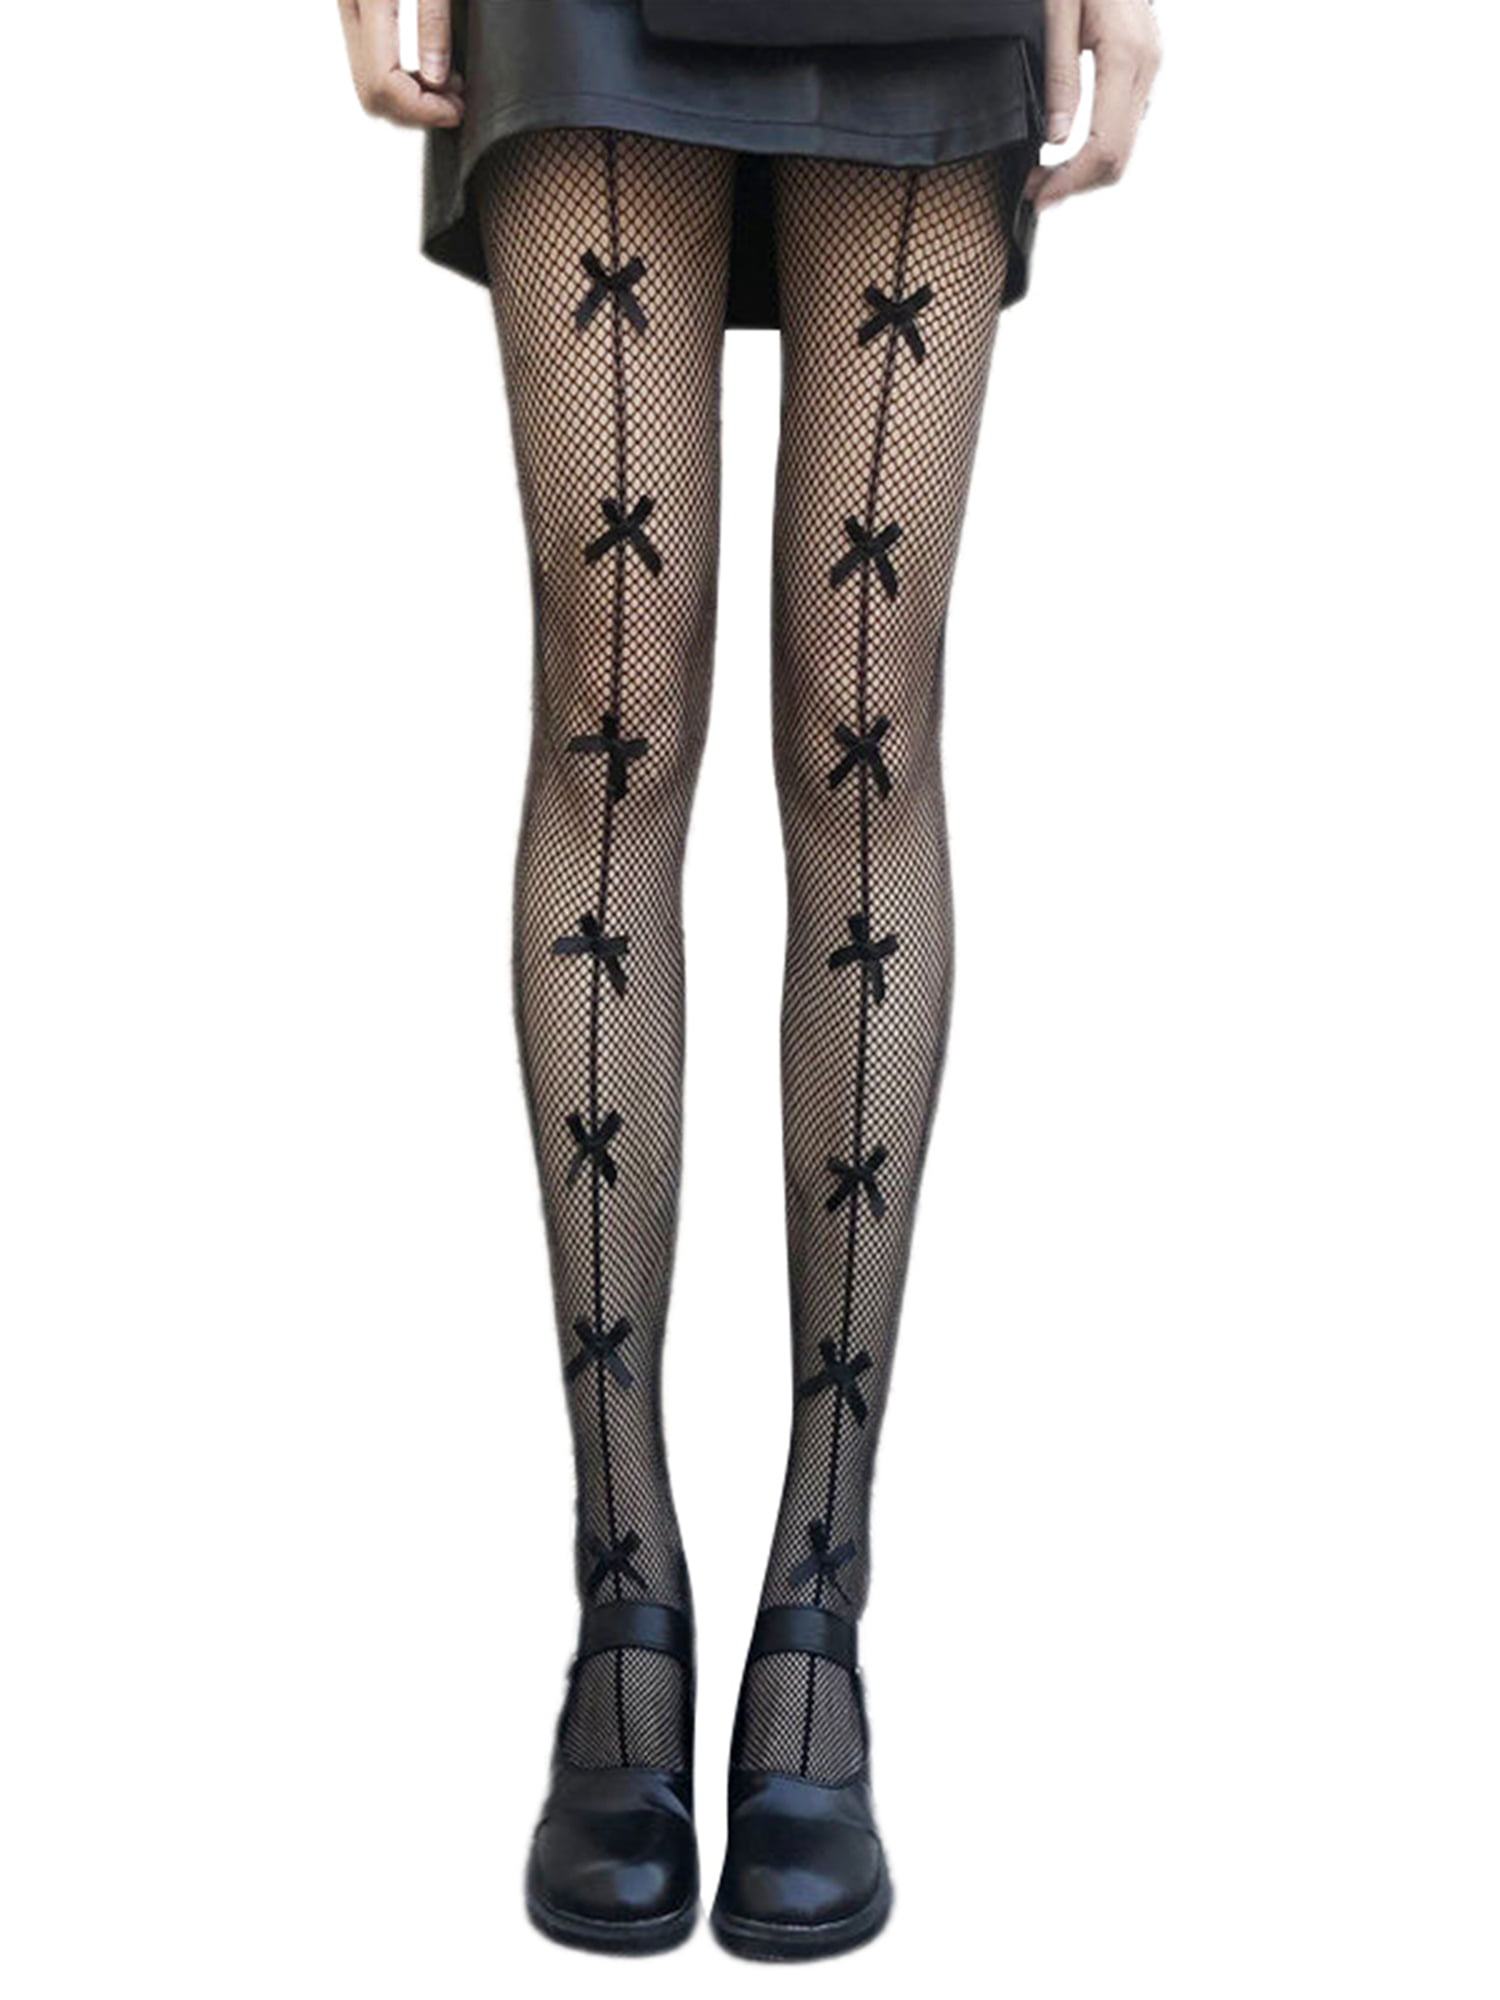 Animal Print Fishnet Stockings Plus Size Goth Lace Pantyhose Fishnet Tights Funky Tights